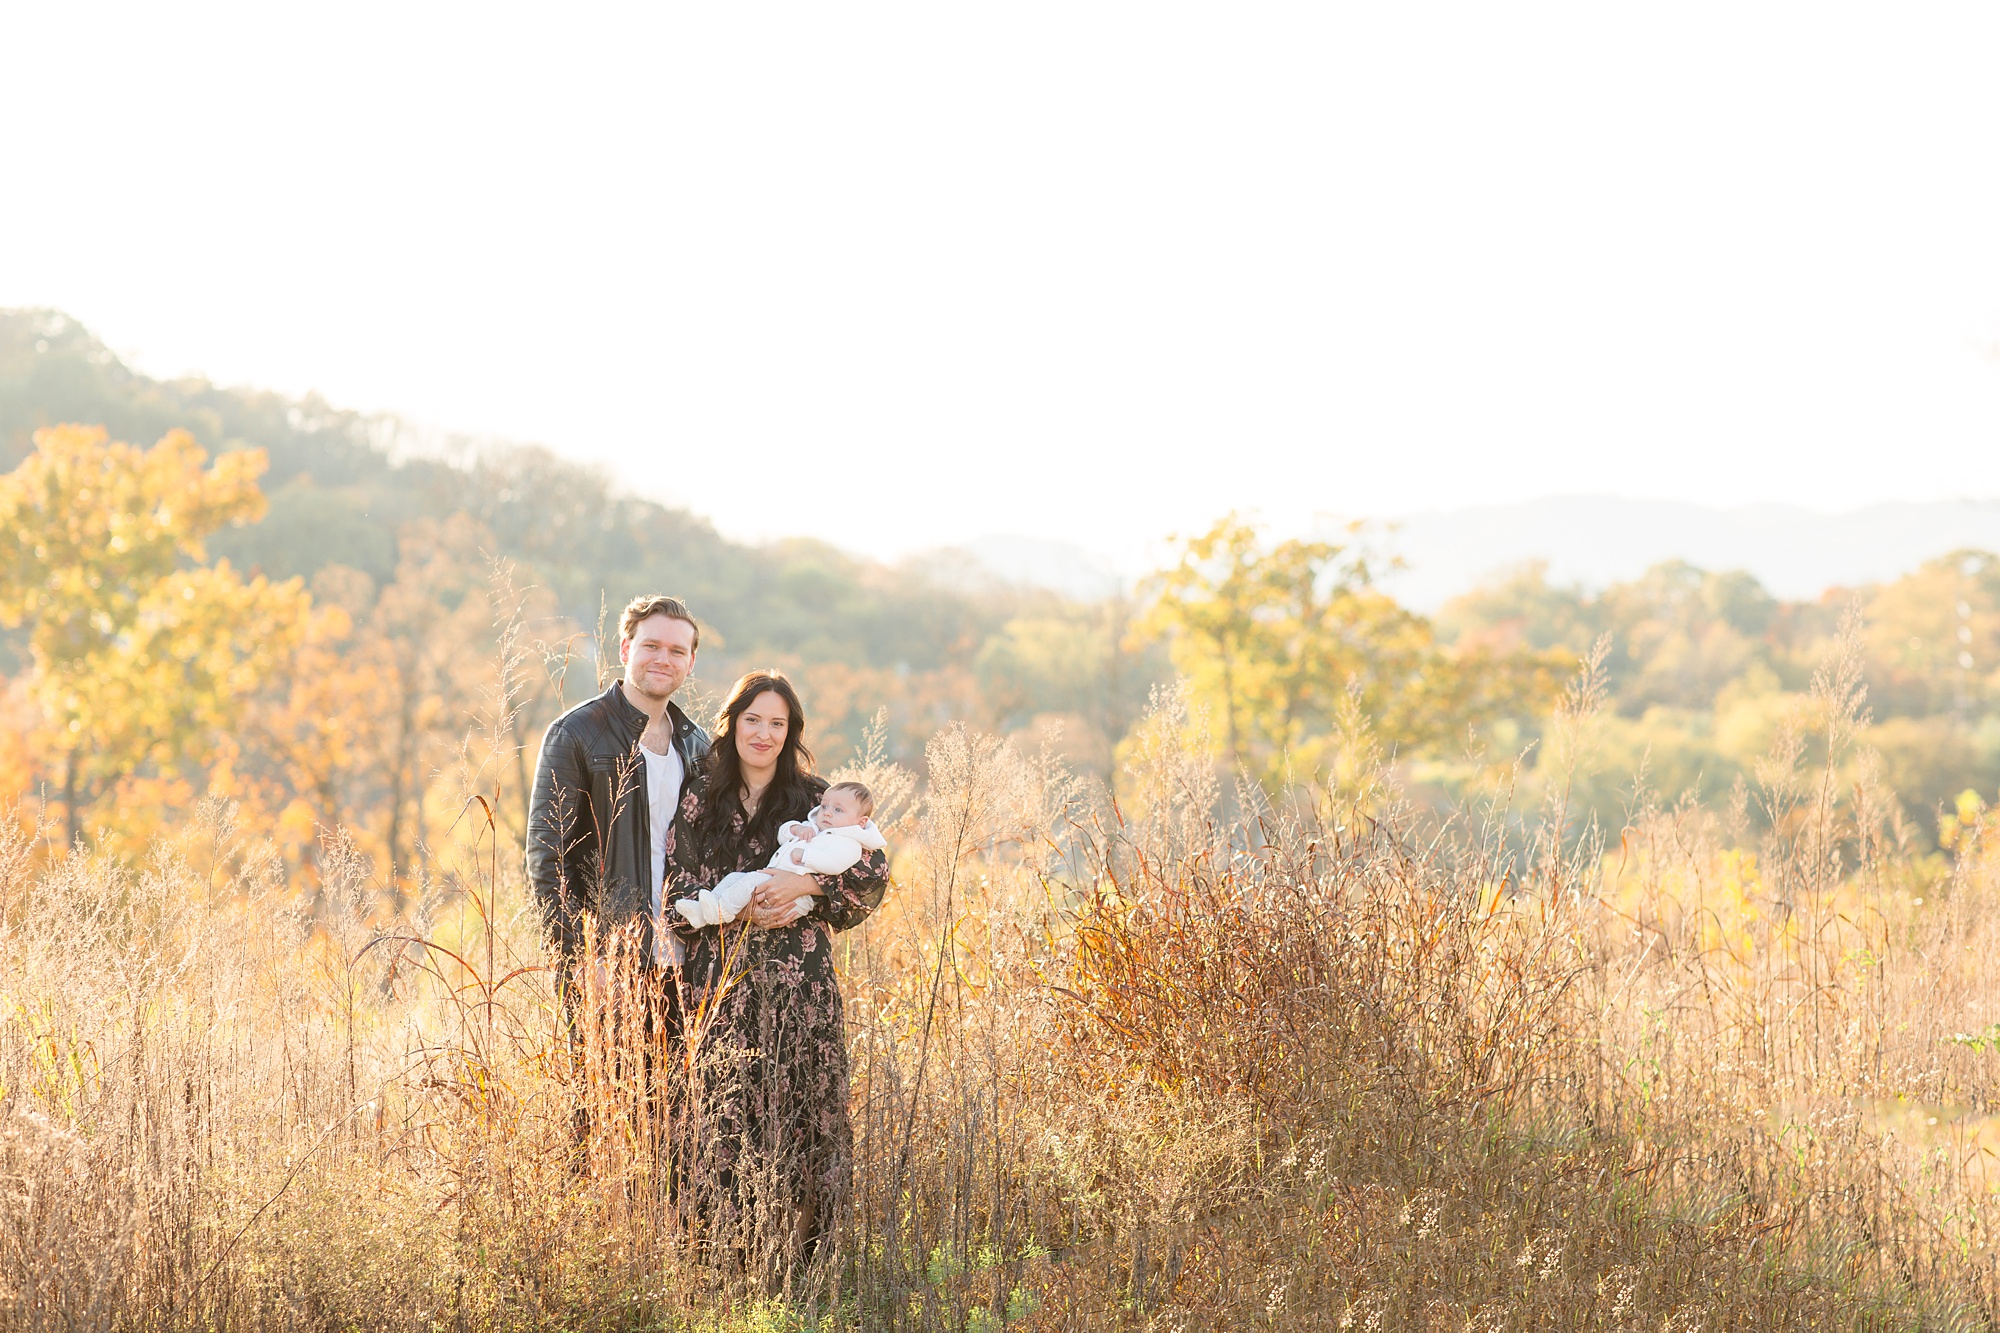 Nashville family portraits at sunset in field